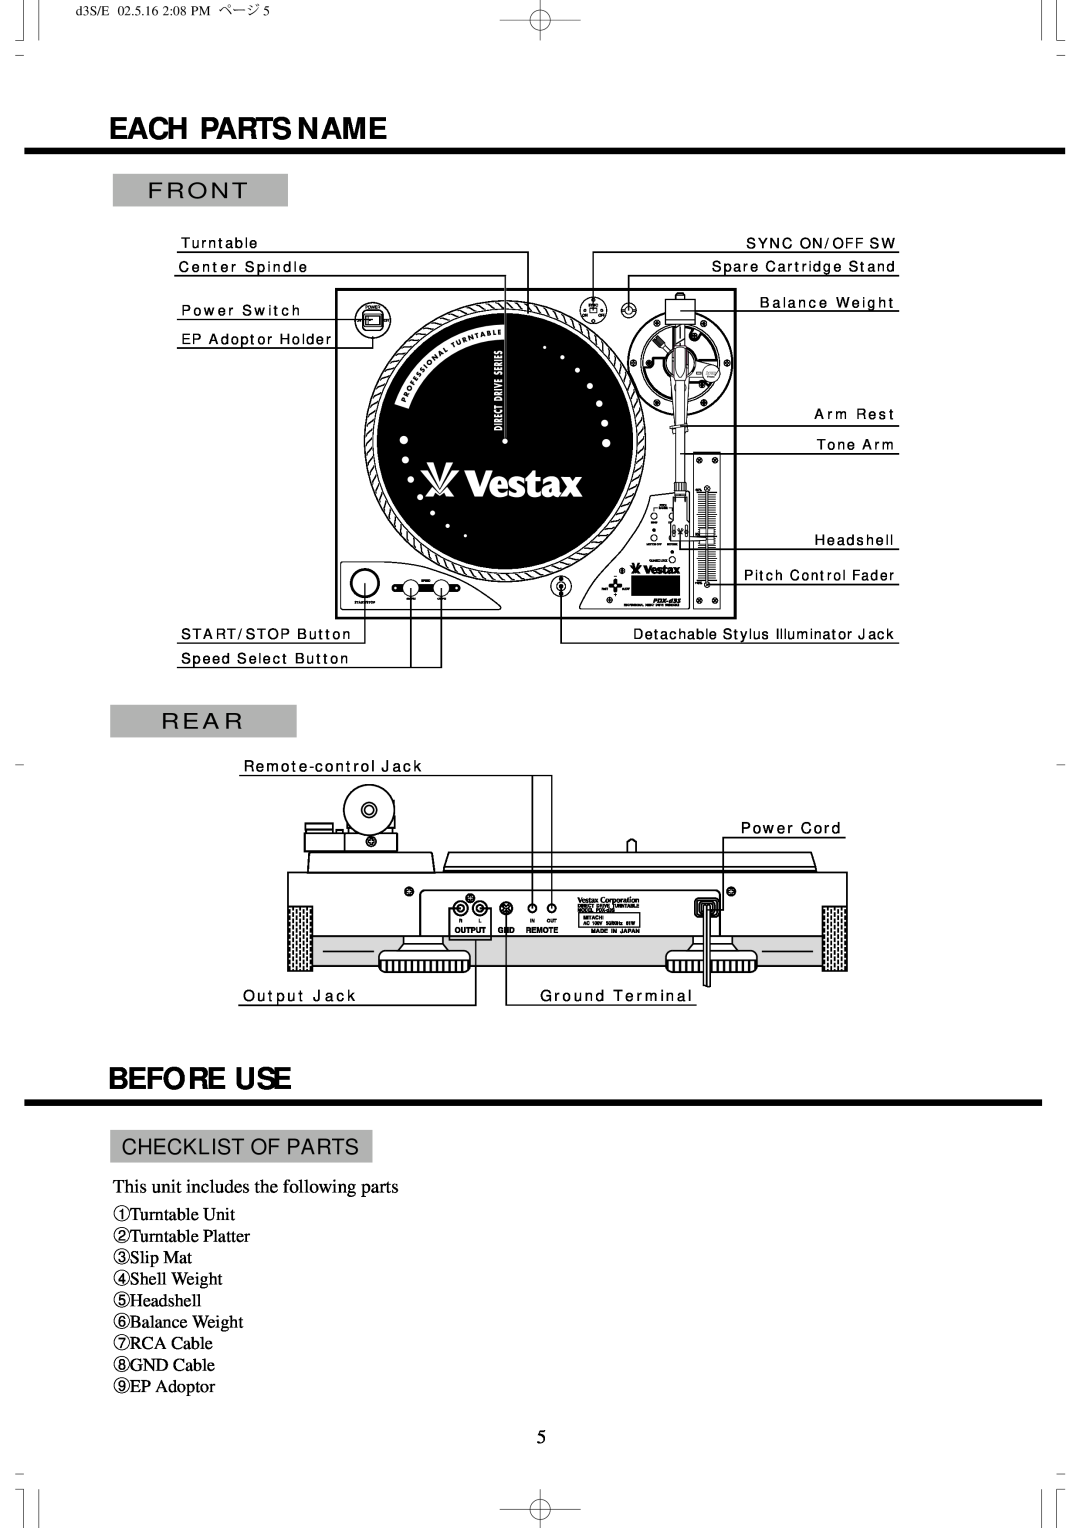 Vestax PDX-d3S owner manual Each Parts Name, Before Use, Front, Rear, Checklist Of Parts 